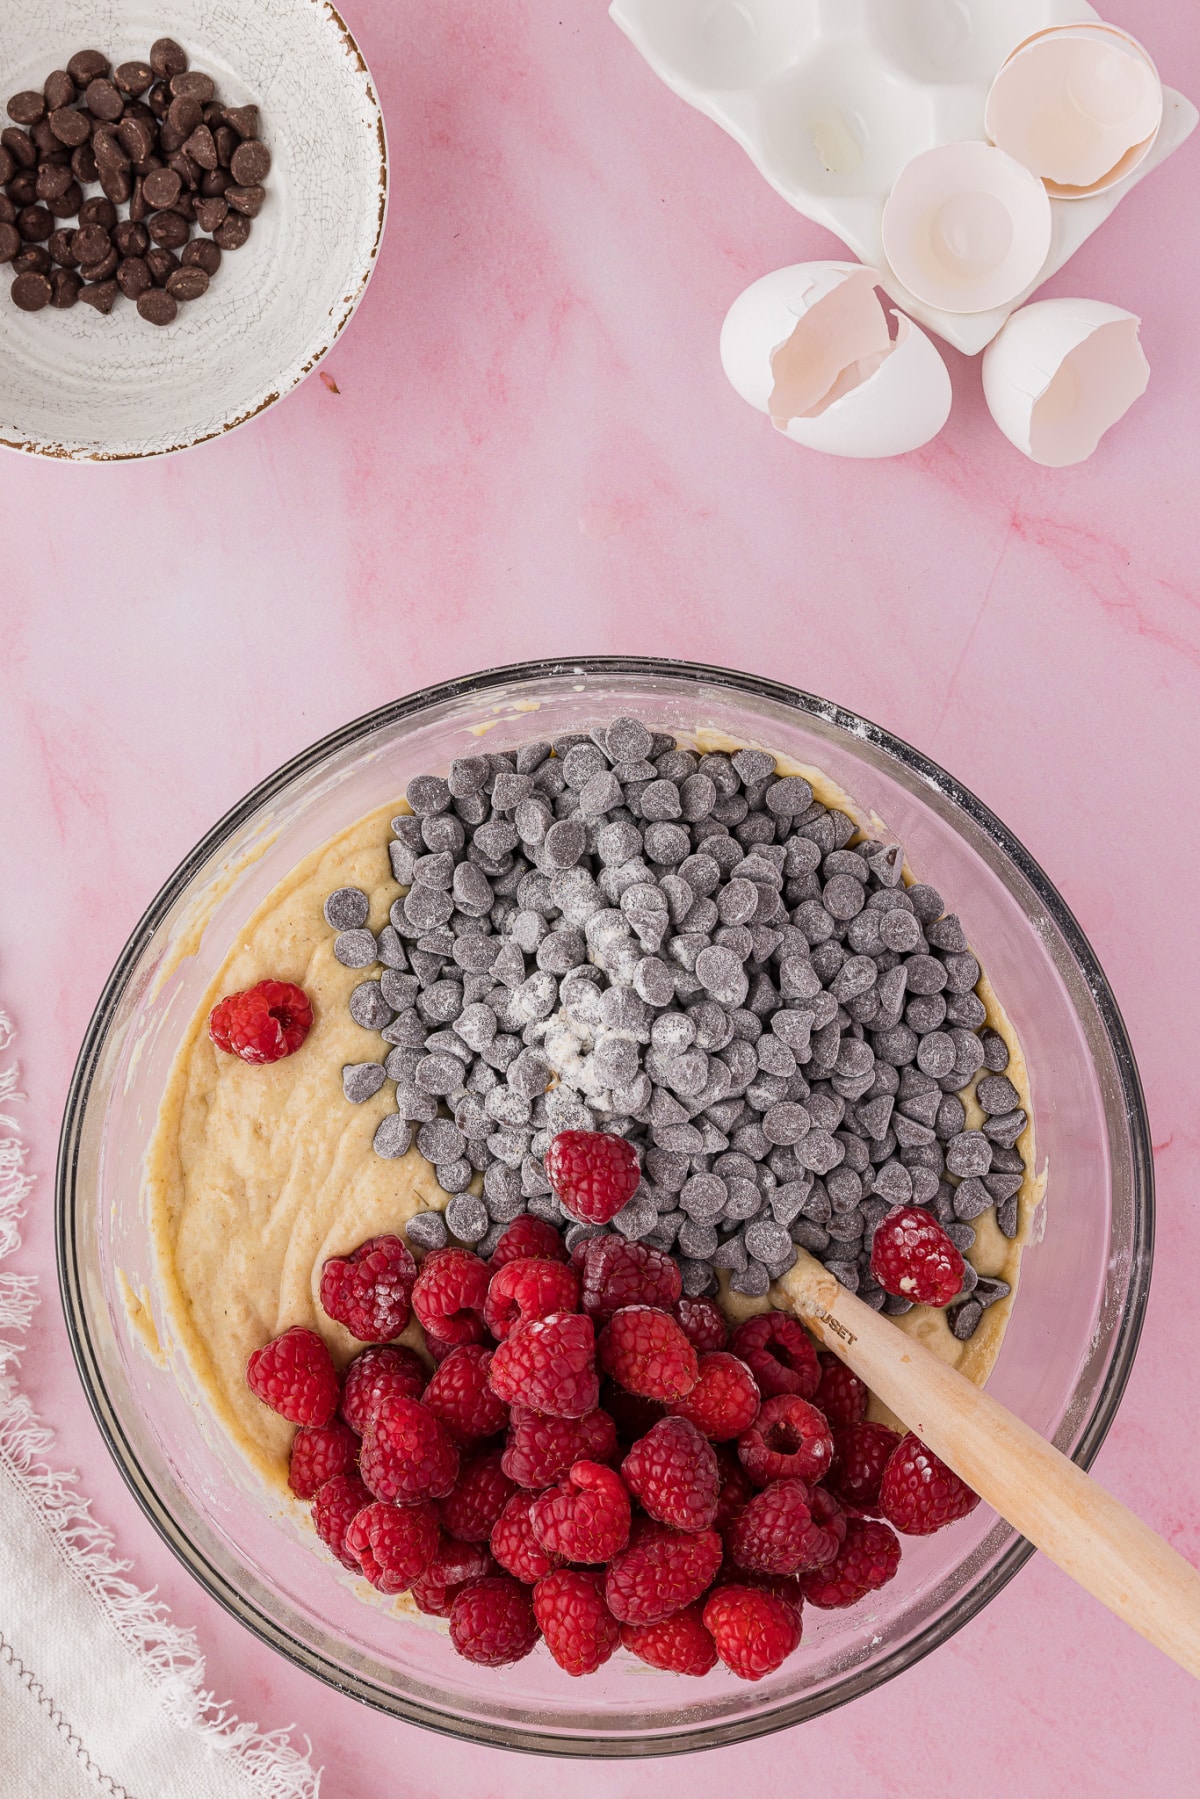 Muffin batter in a bowl with raspberries and chocolate chips on a pink table top